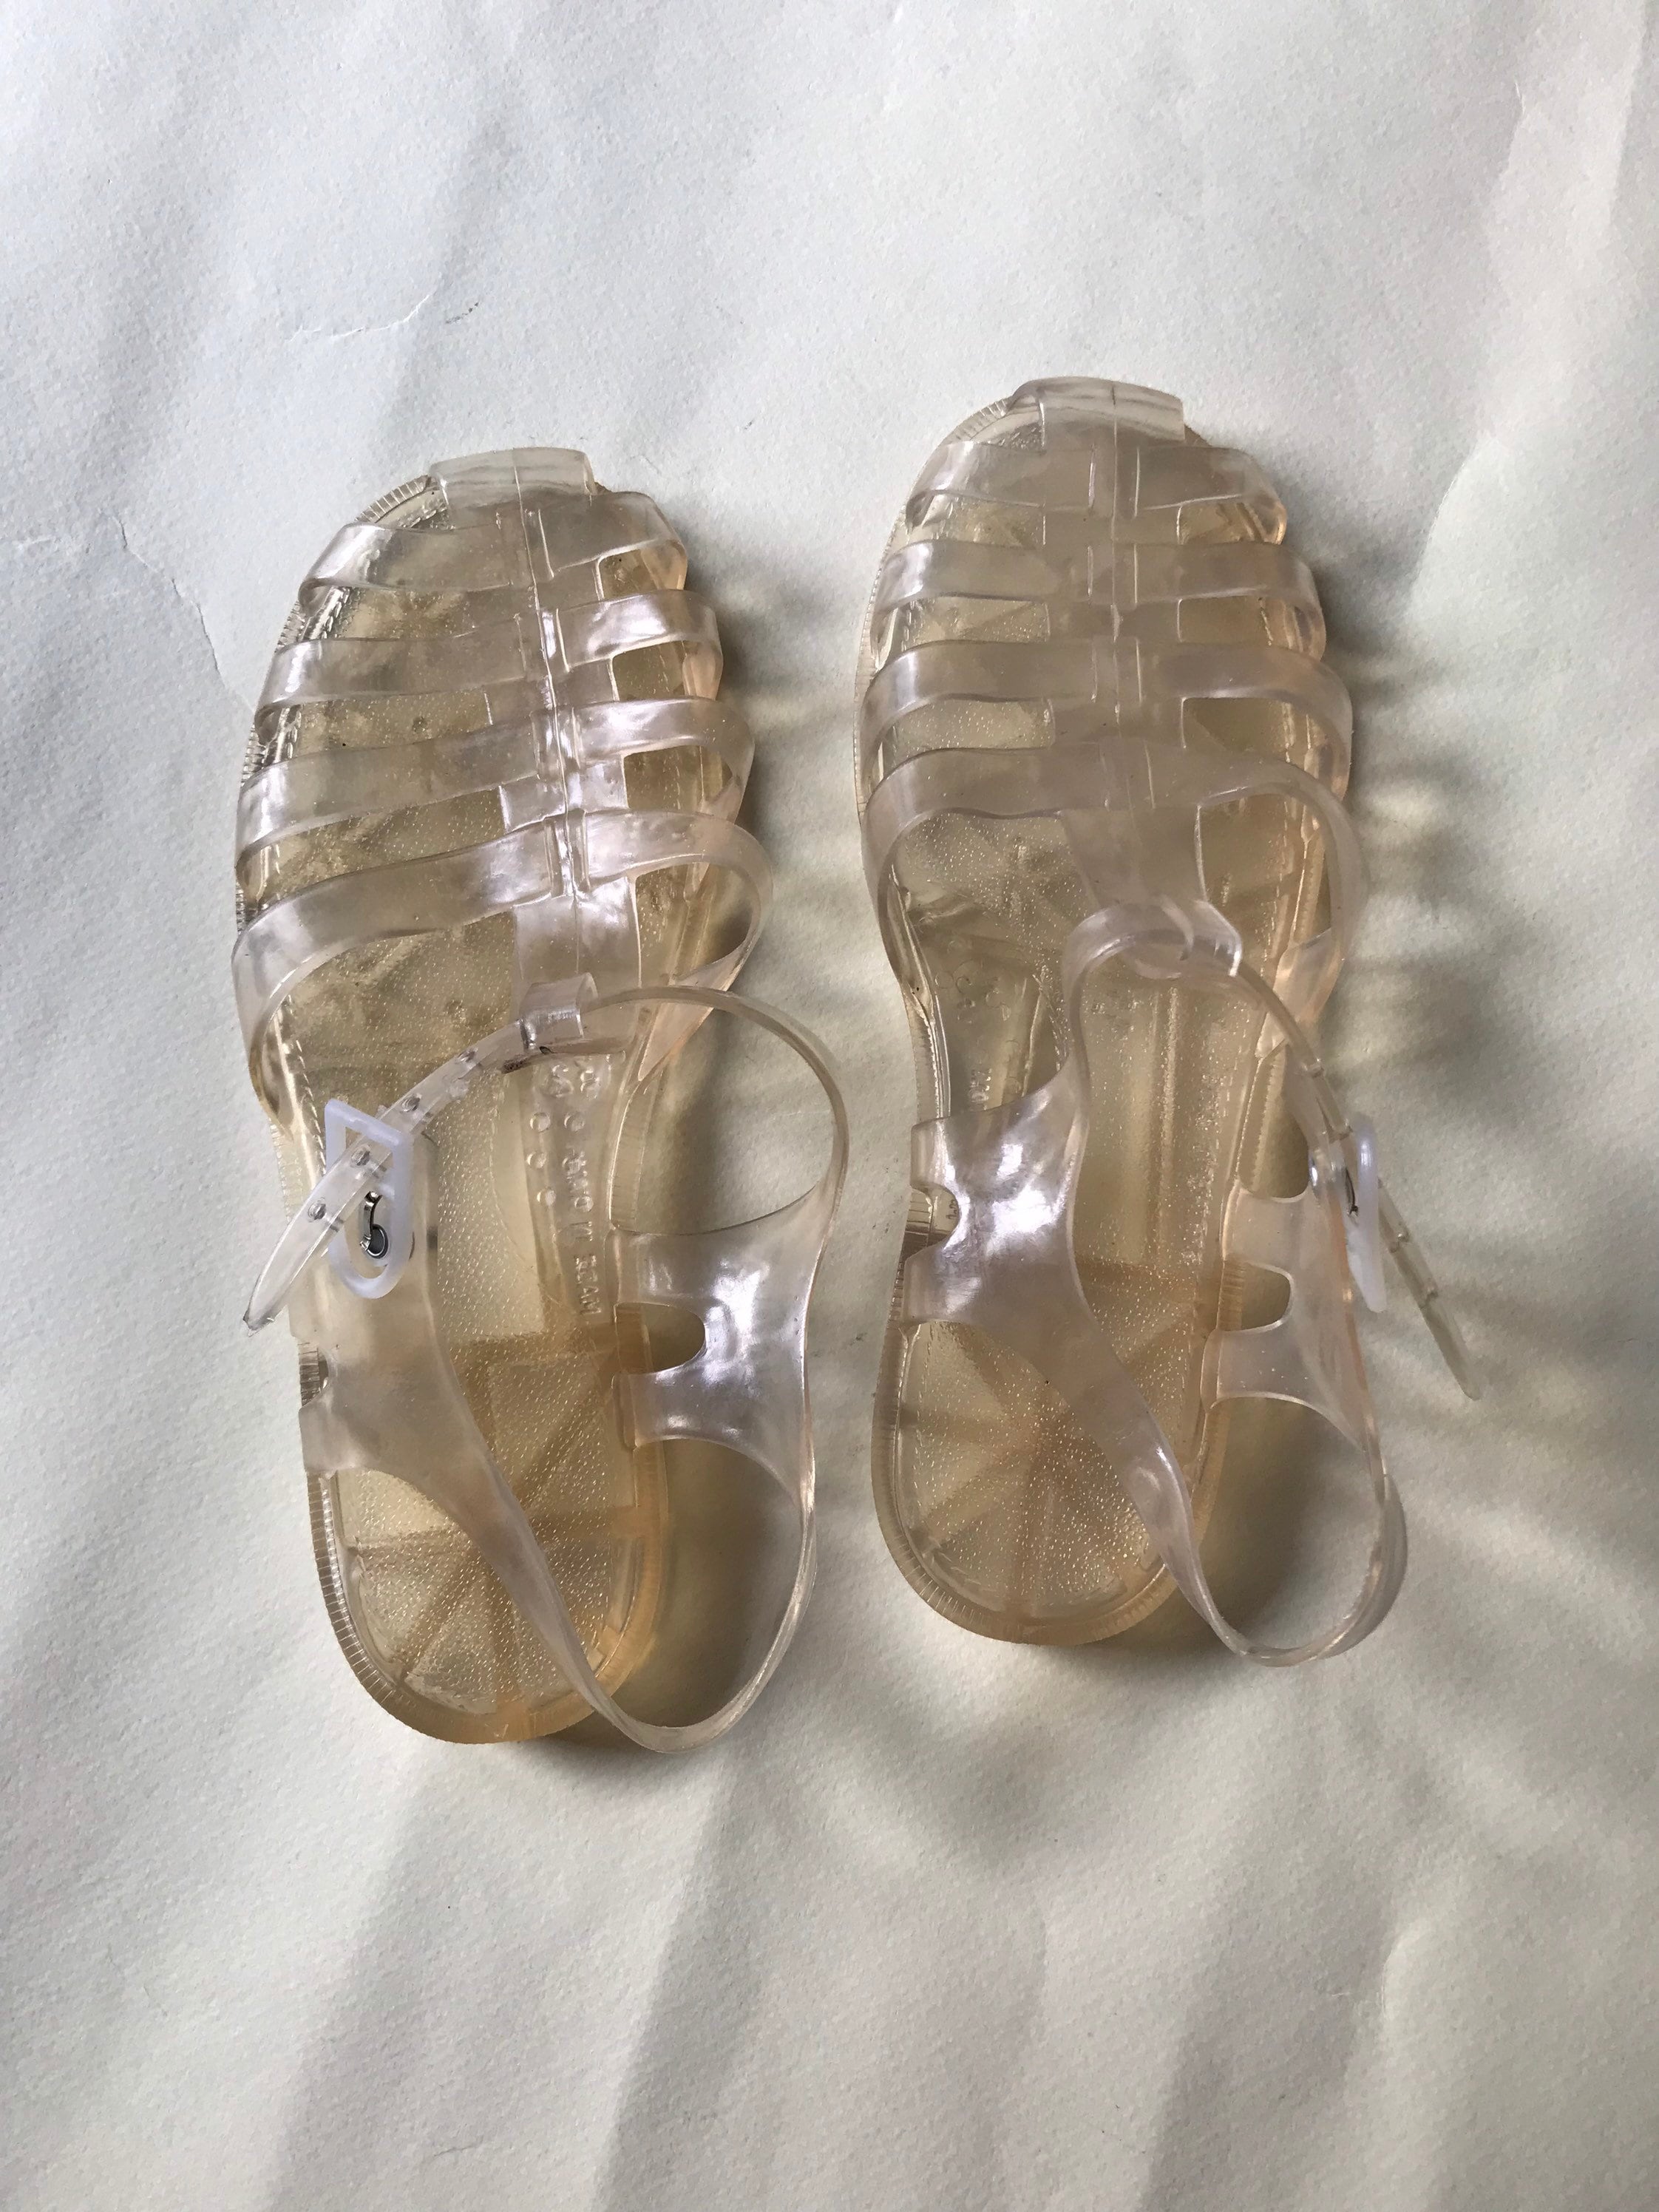 Clear Jelly Shoes for Kids With Buckle Closure 90s - Etsy UK